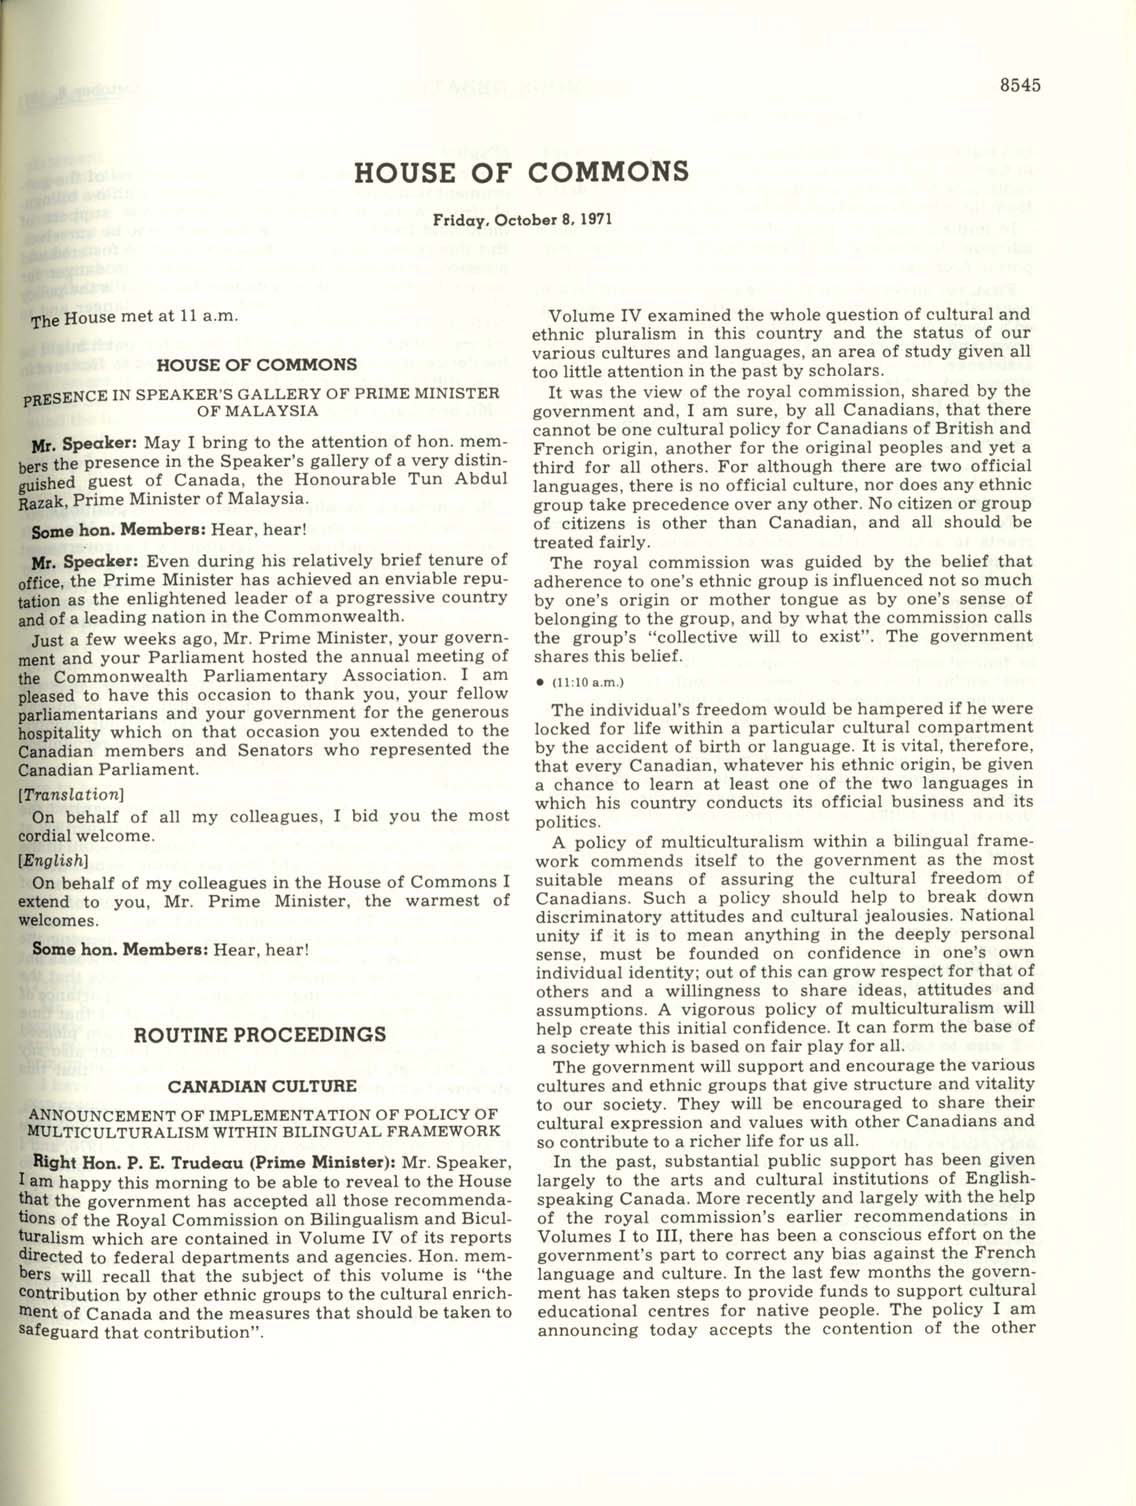 Page 8545 Canadian Multiculturalism Policy, 1971